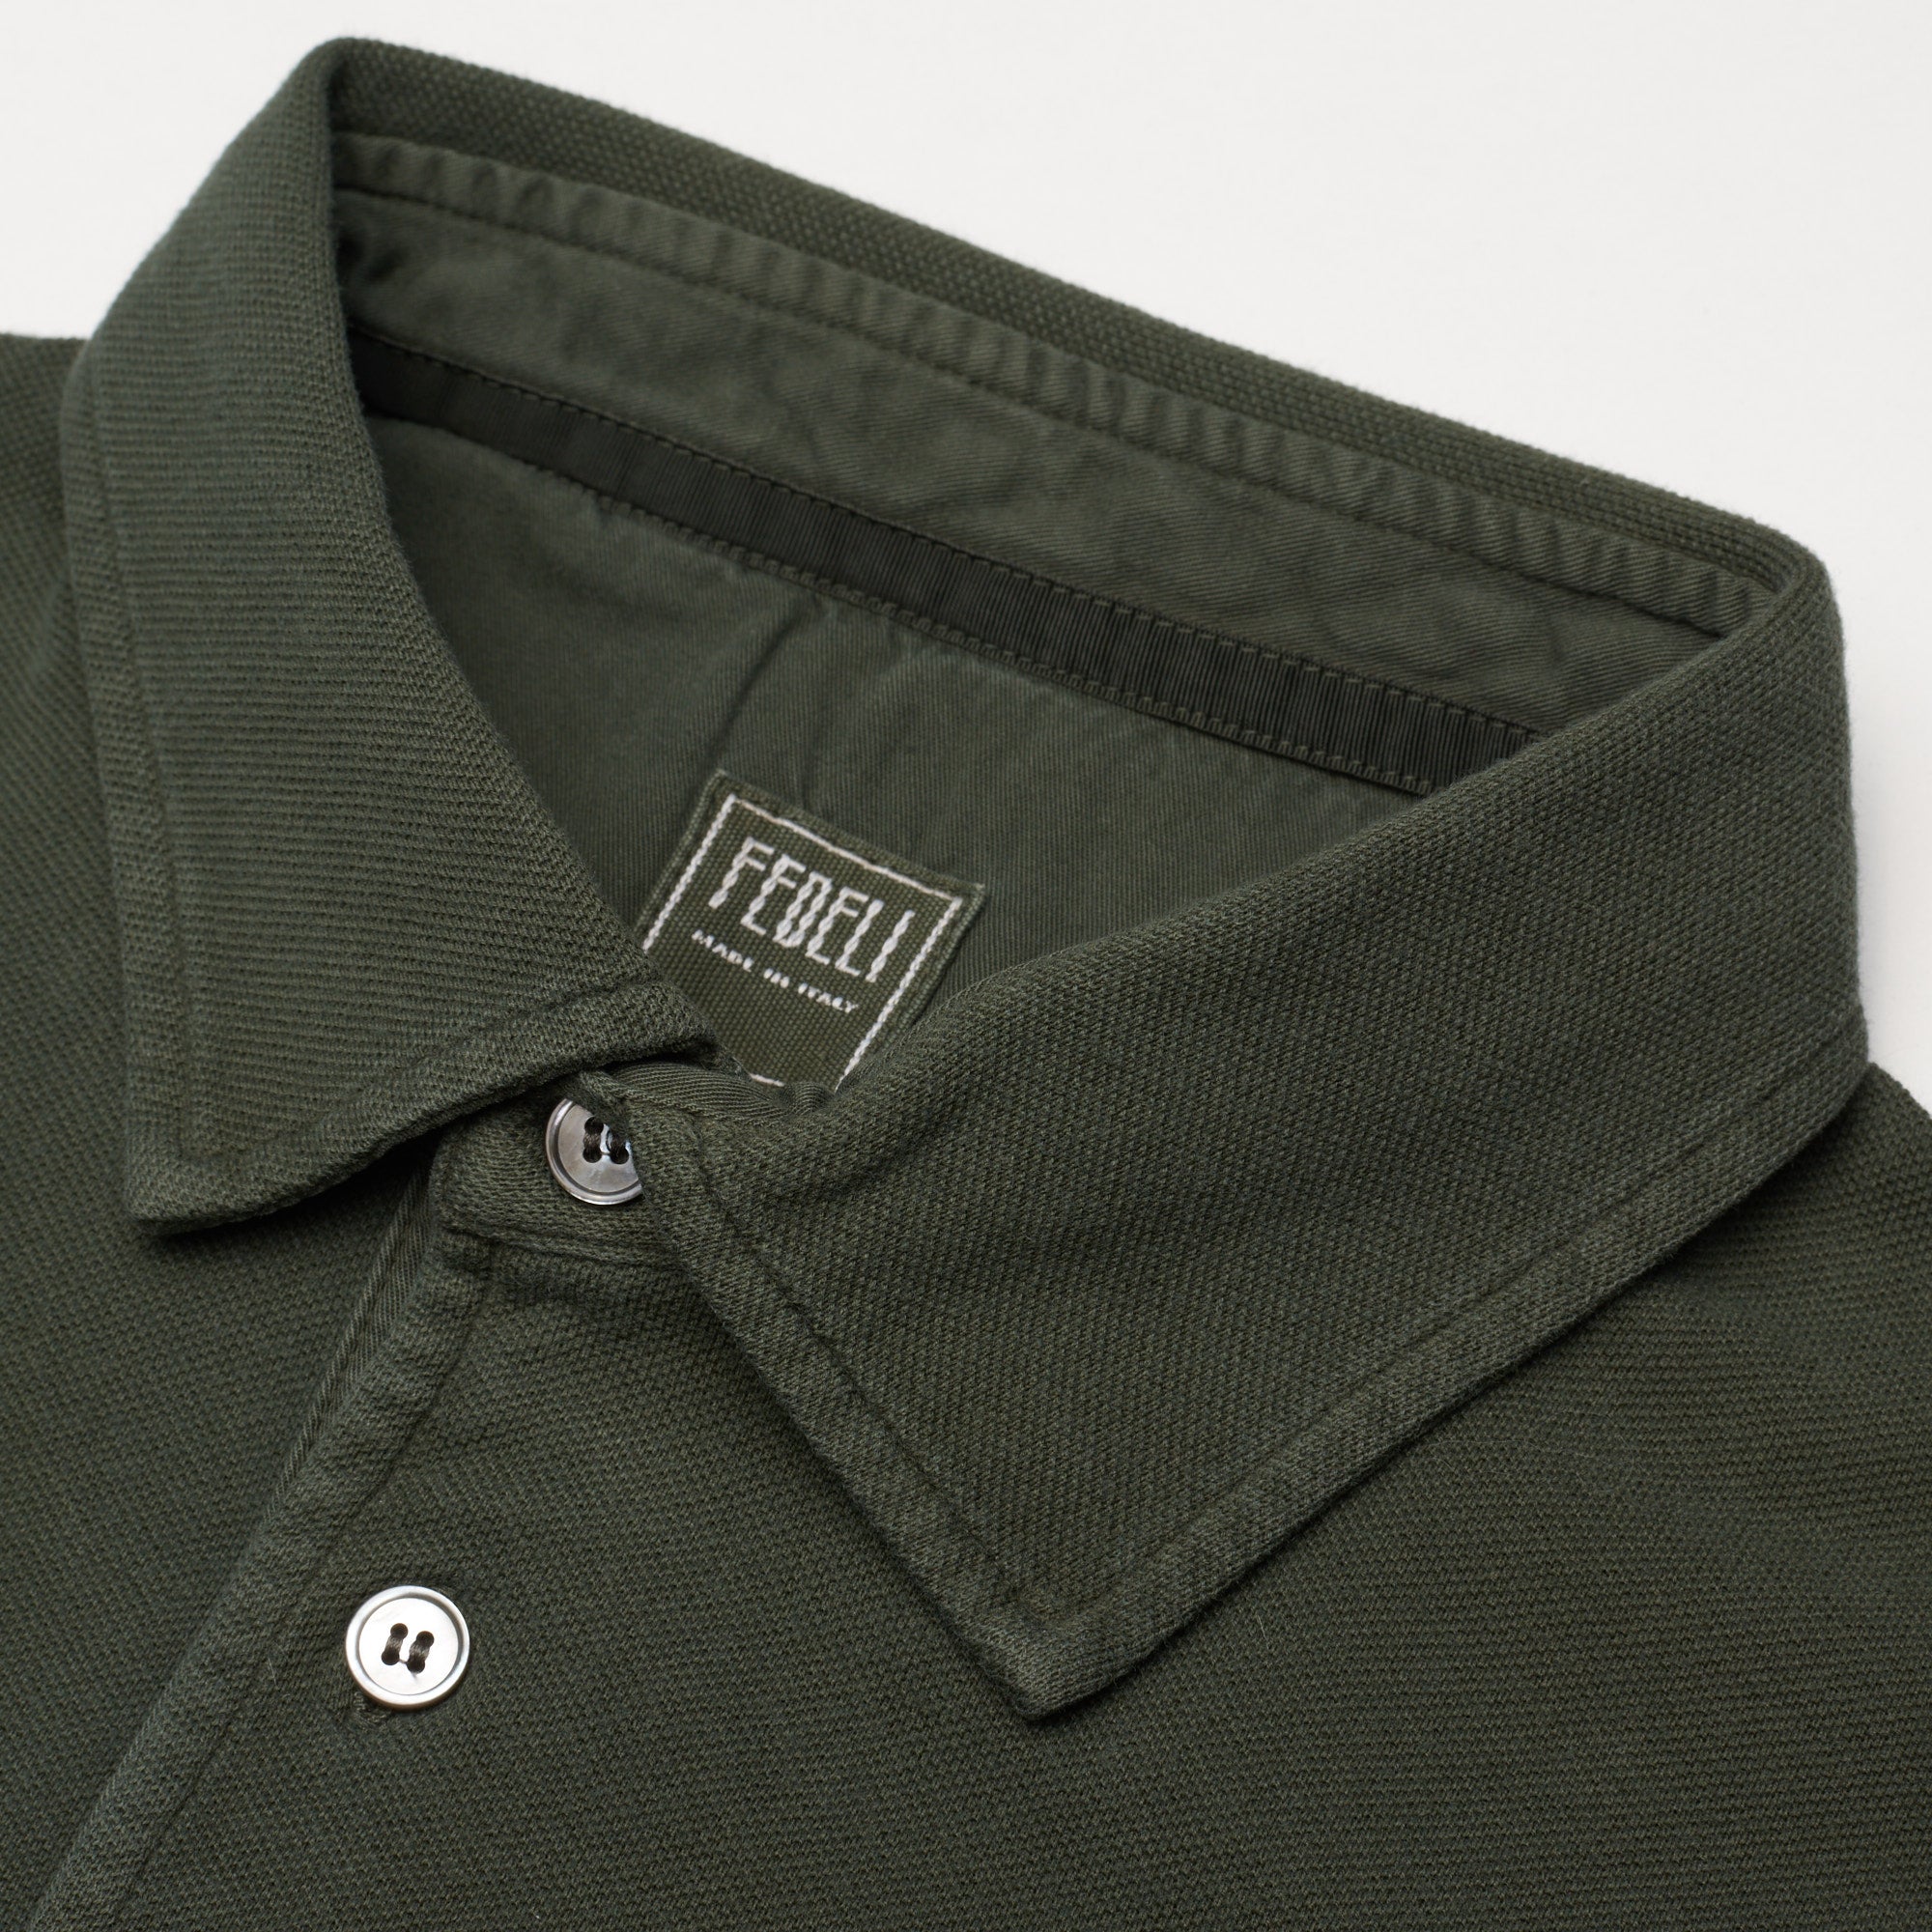 FEDELI "North" Solid Army Green Cotton Pique Long Sleeve Polo Shirt NEW